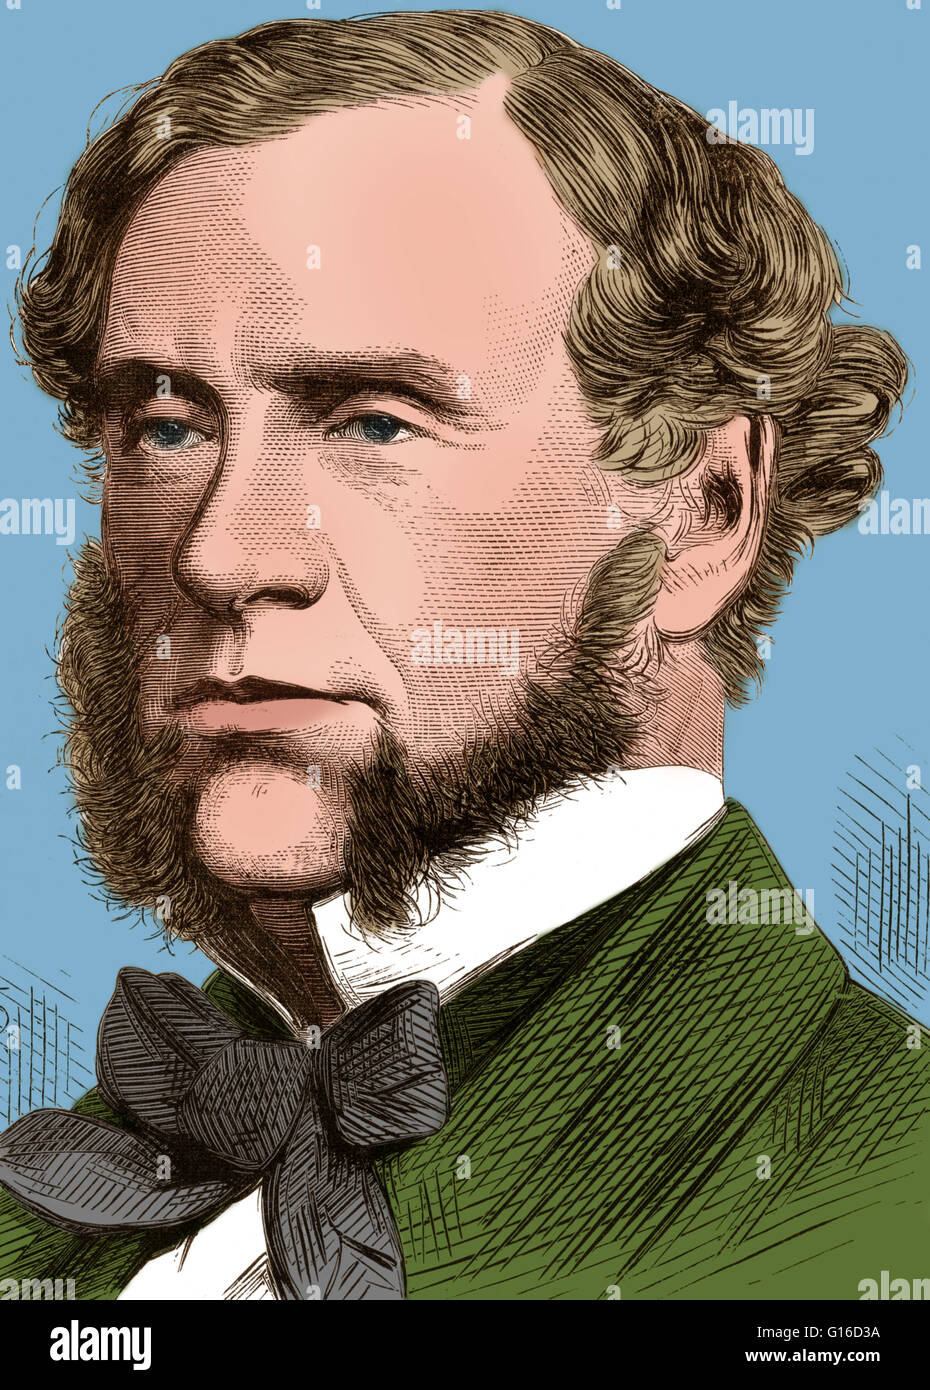 William Robert Grove (1811-1896) was a judge and physical scientist. He anticipated the general theory of the conservation of energy, and was a pioneer of fuel cell technology. In 1842, Grove developed the first fuel cell (which he called the gas voltaic Stock Photo